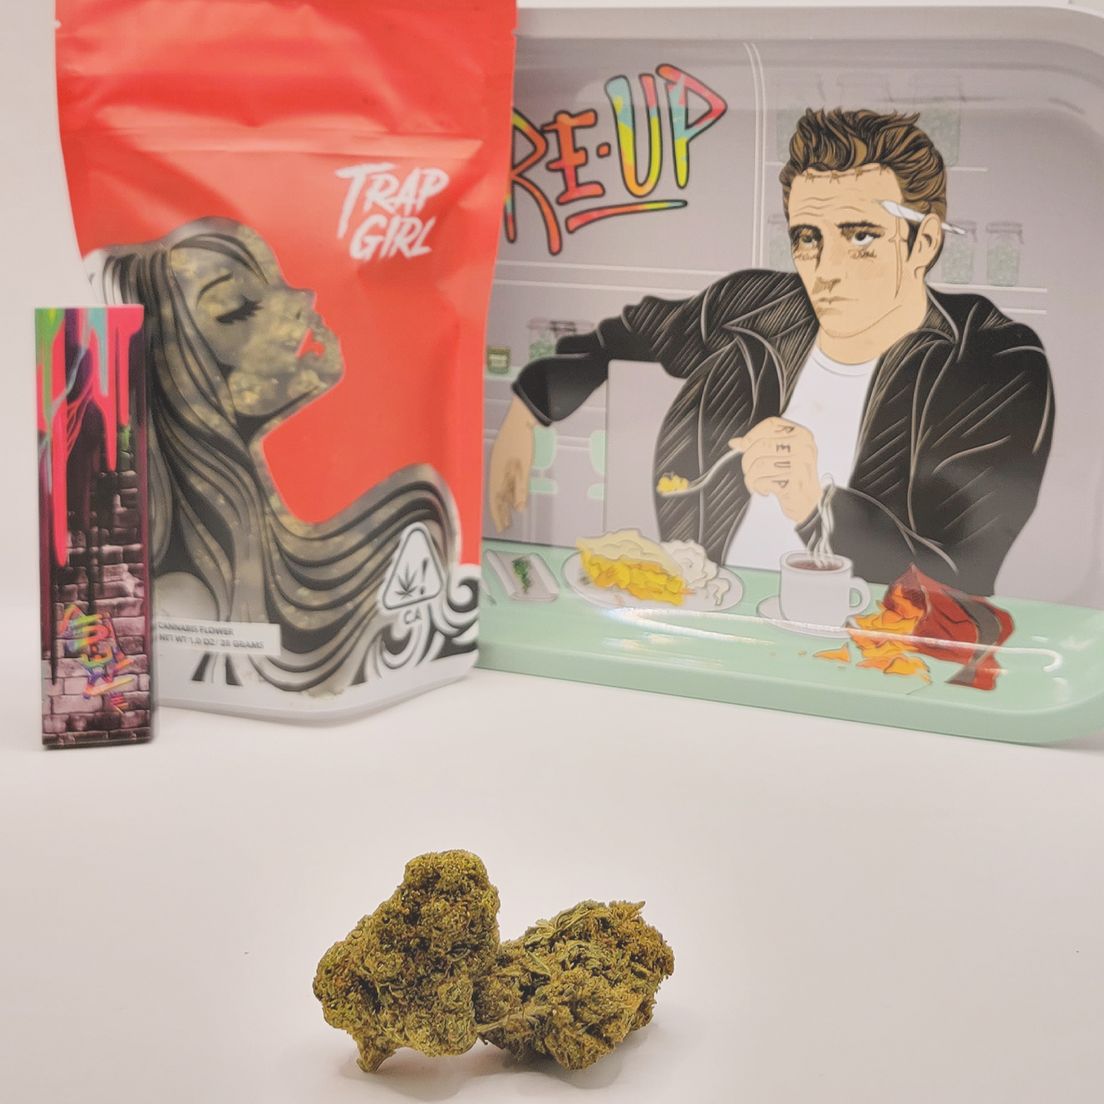 *Deal! $105 1 oz. Chemdog (31.26%/Hybrid) - Trap Girl + Rolling Papers + Rolling Tray